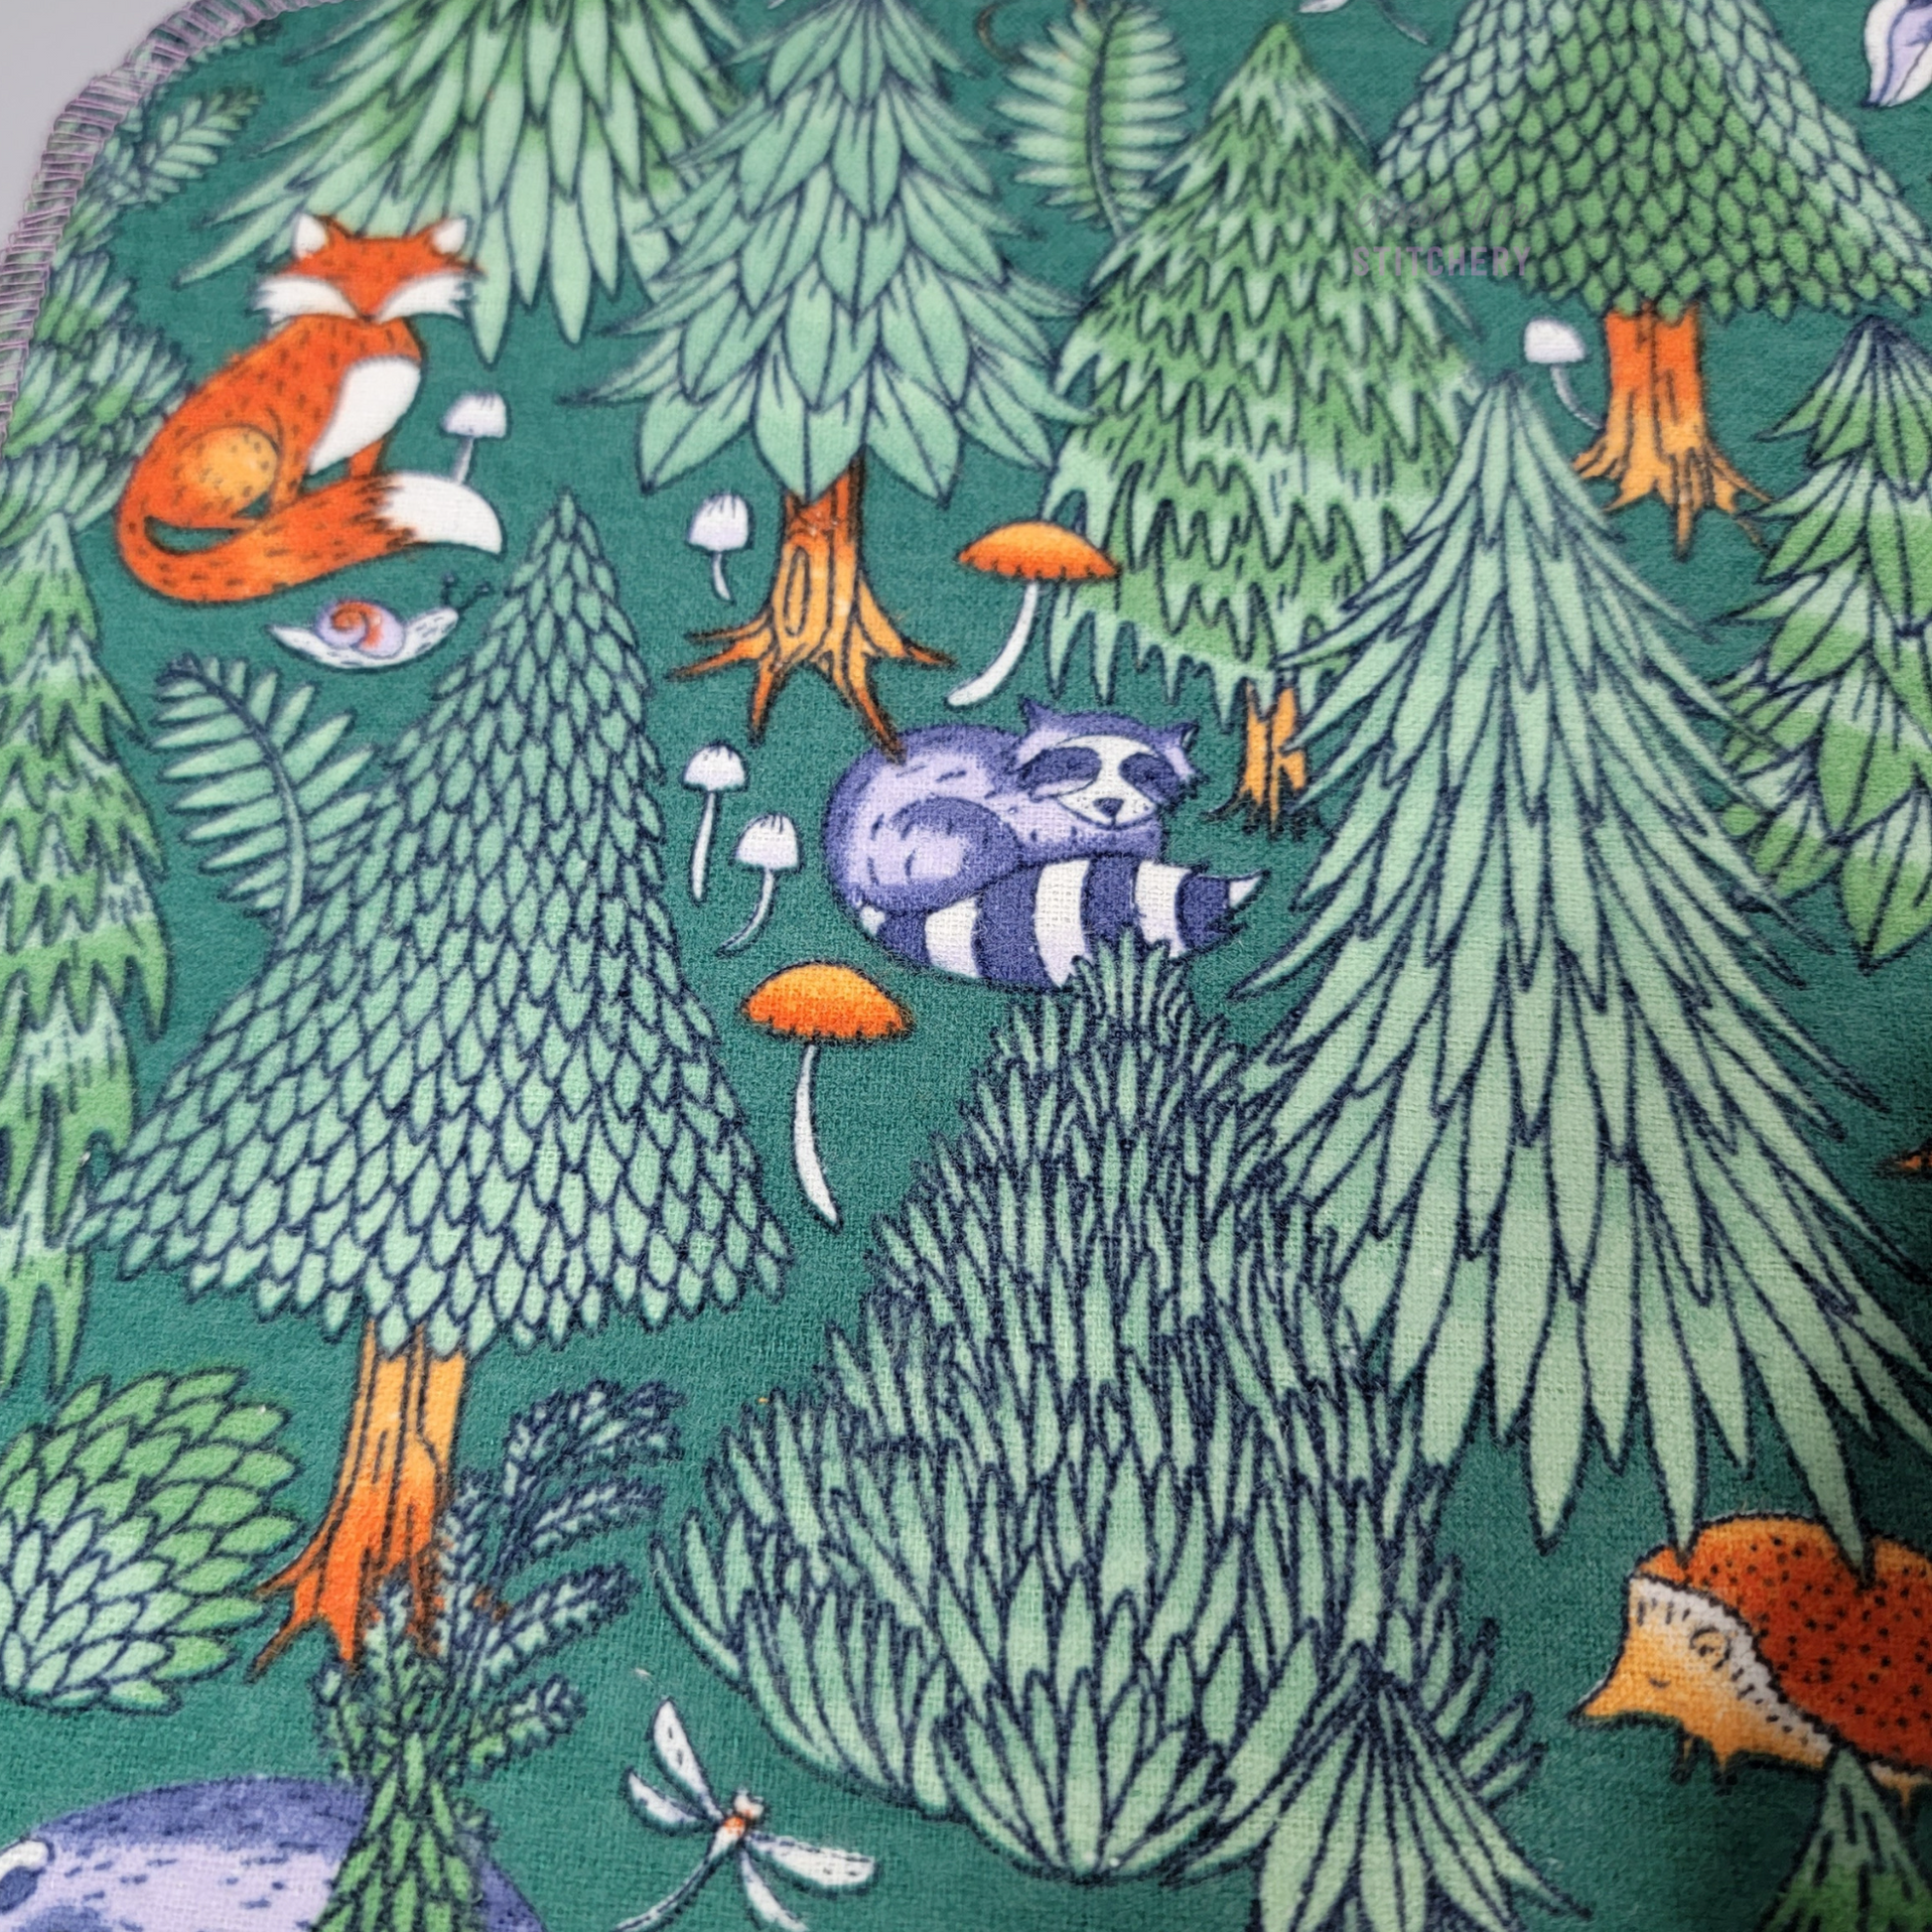 Close-up of the print, showing a fox, raccoon, and hedgehog.